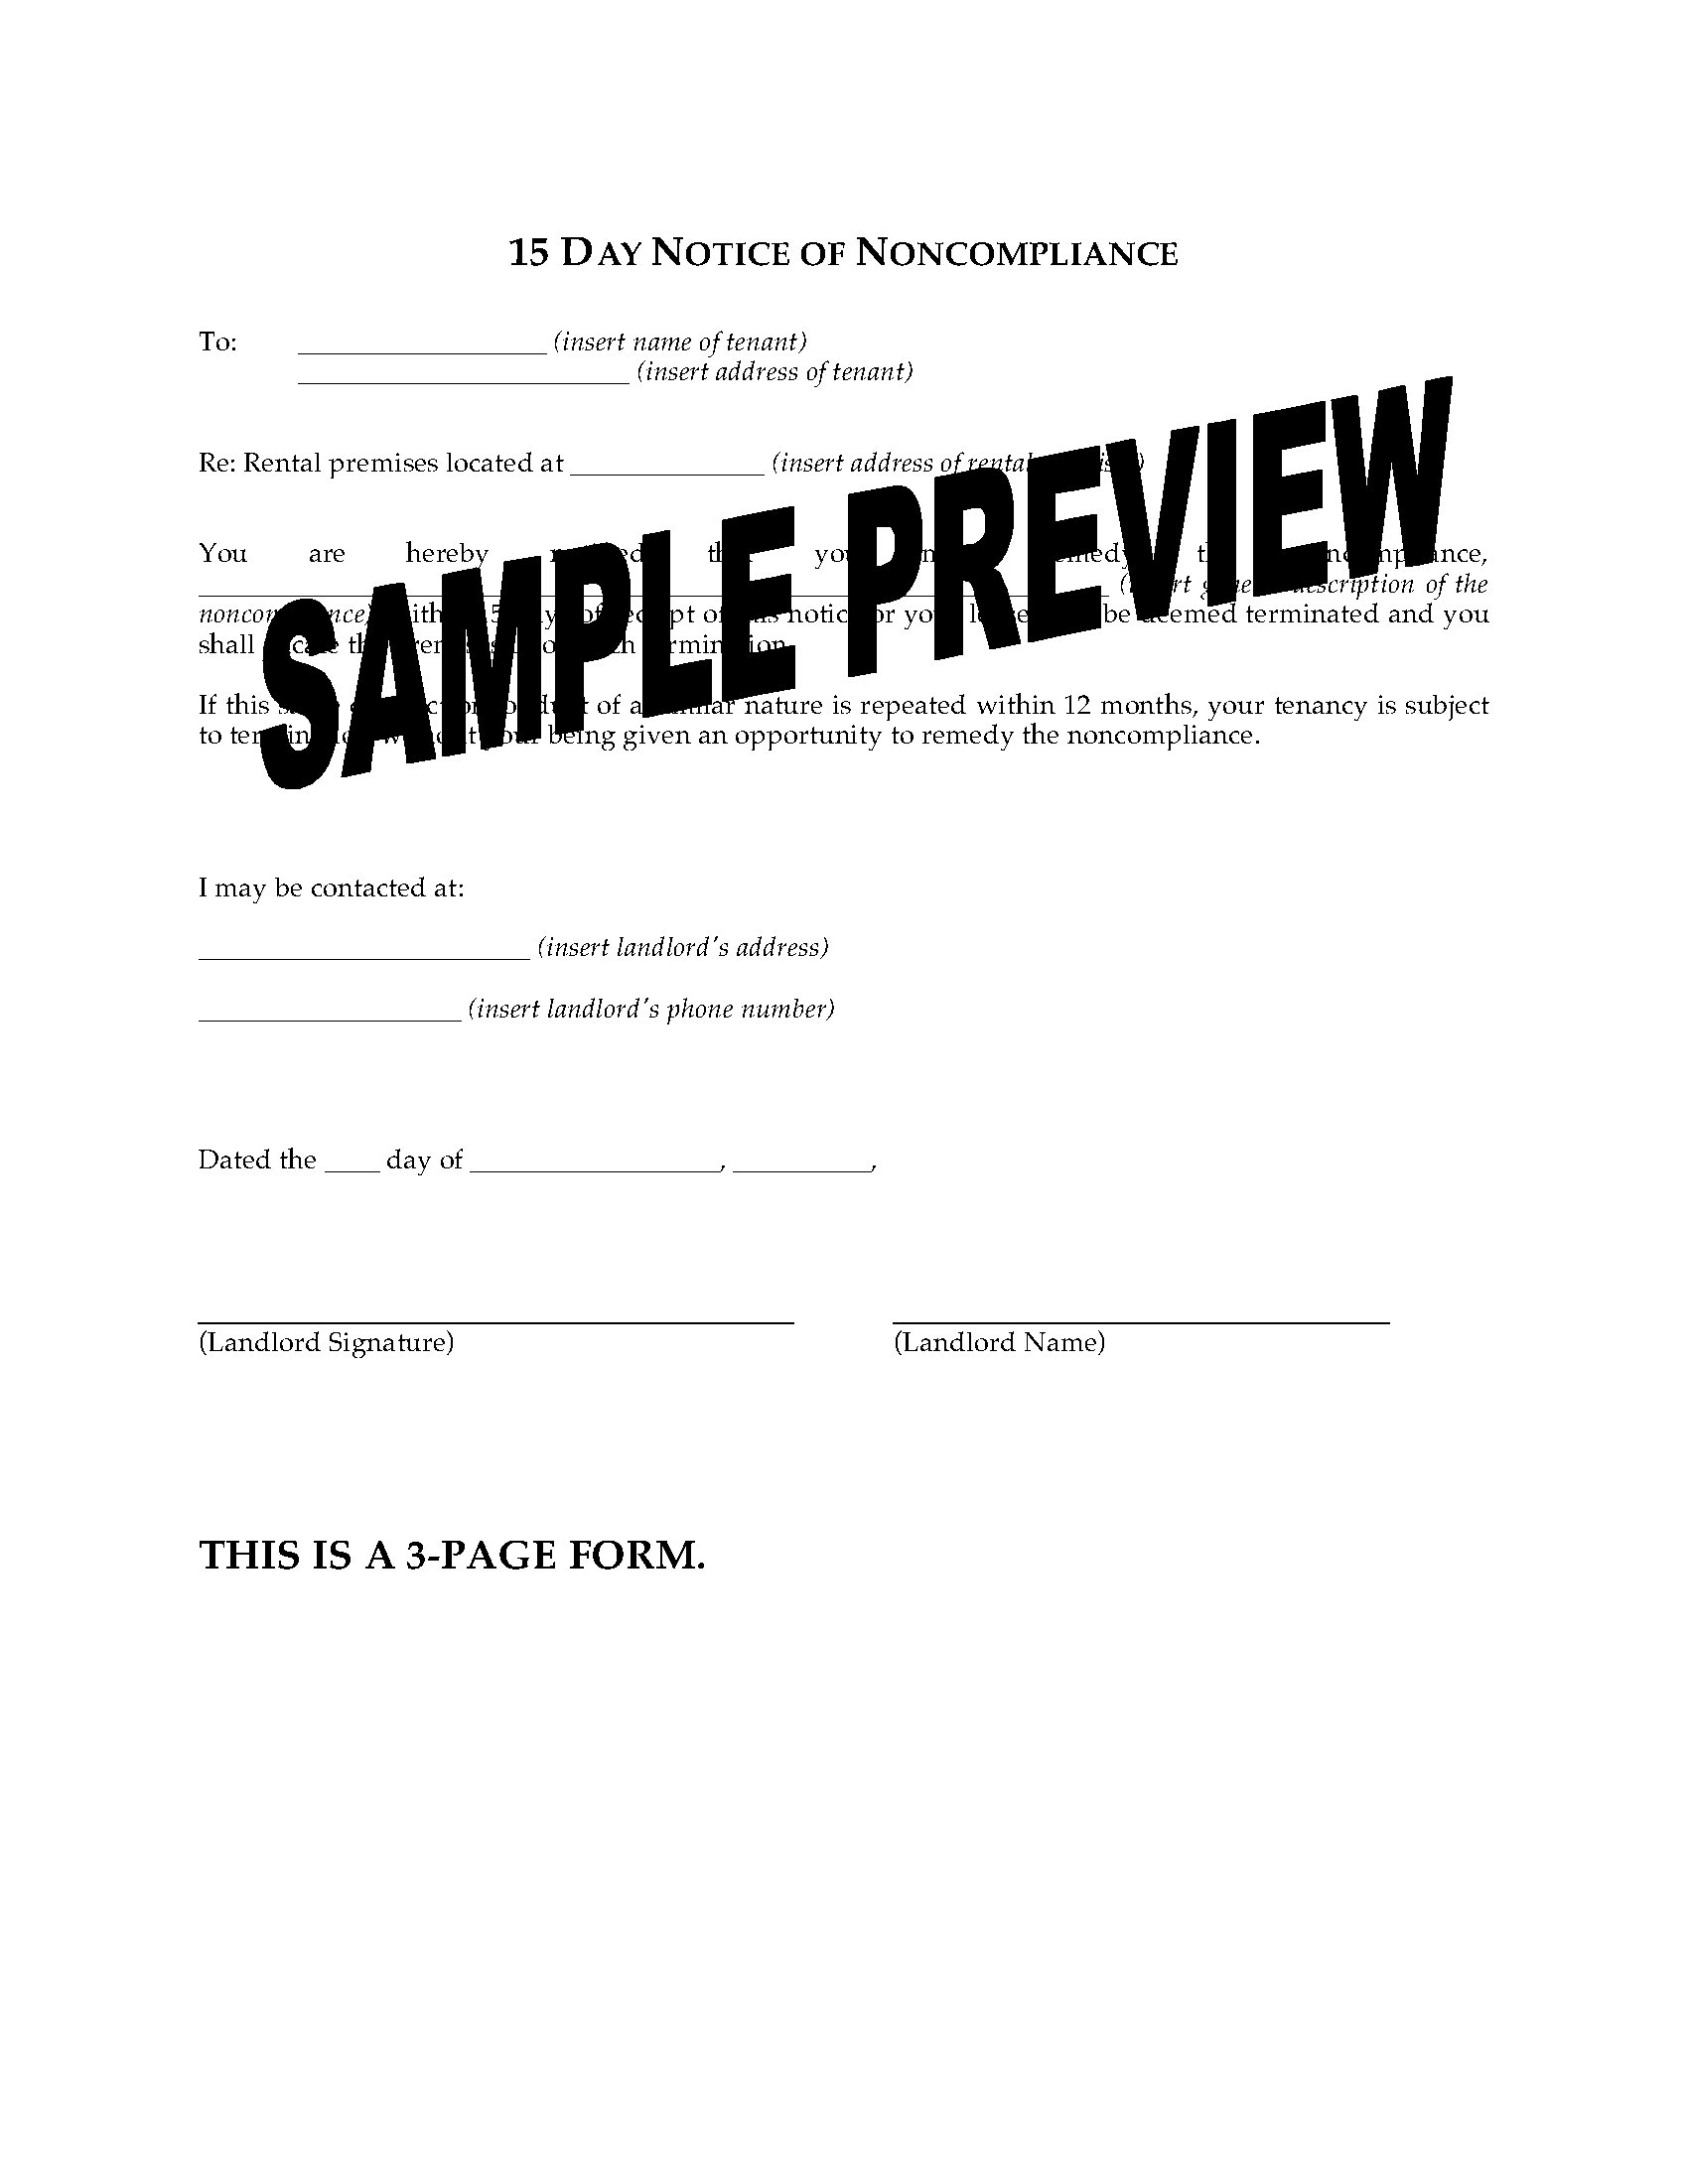 Florida 15 Day Notice Of Noncompliance Legal Forms And Business Templates Megadox Com